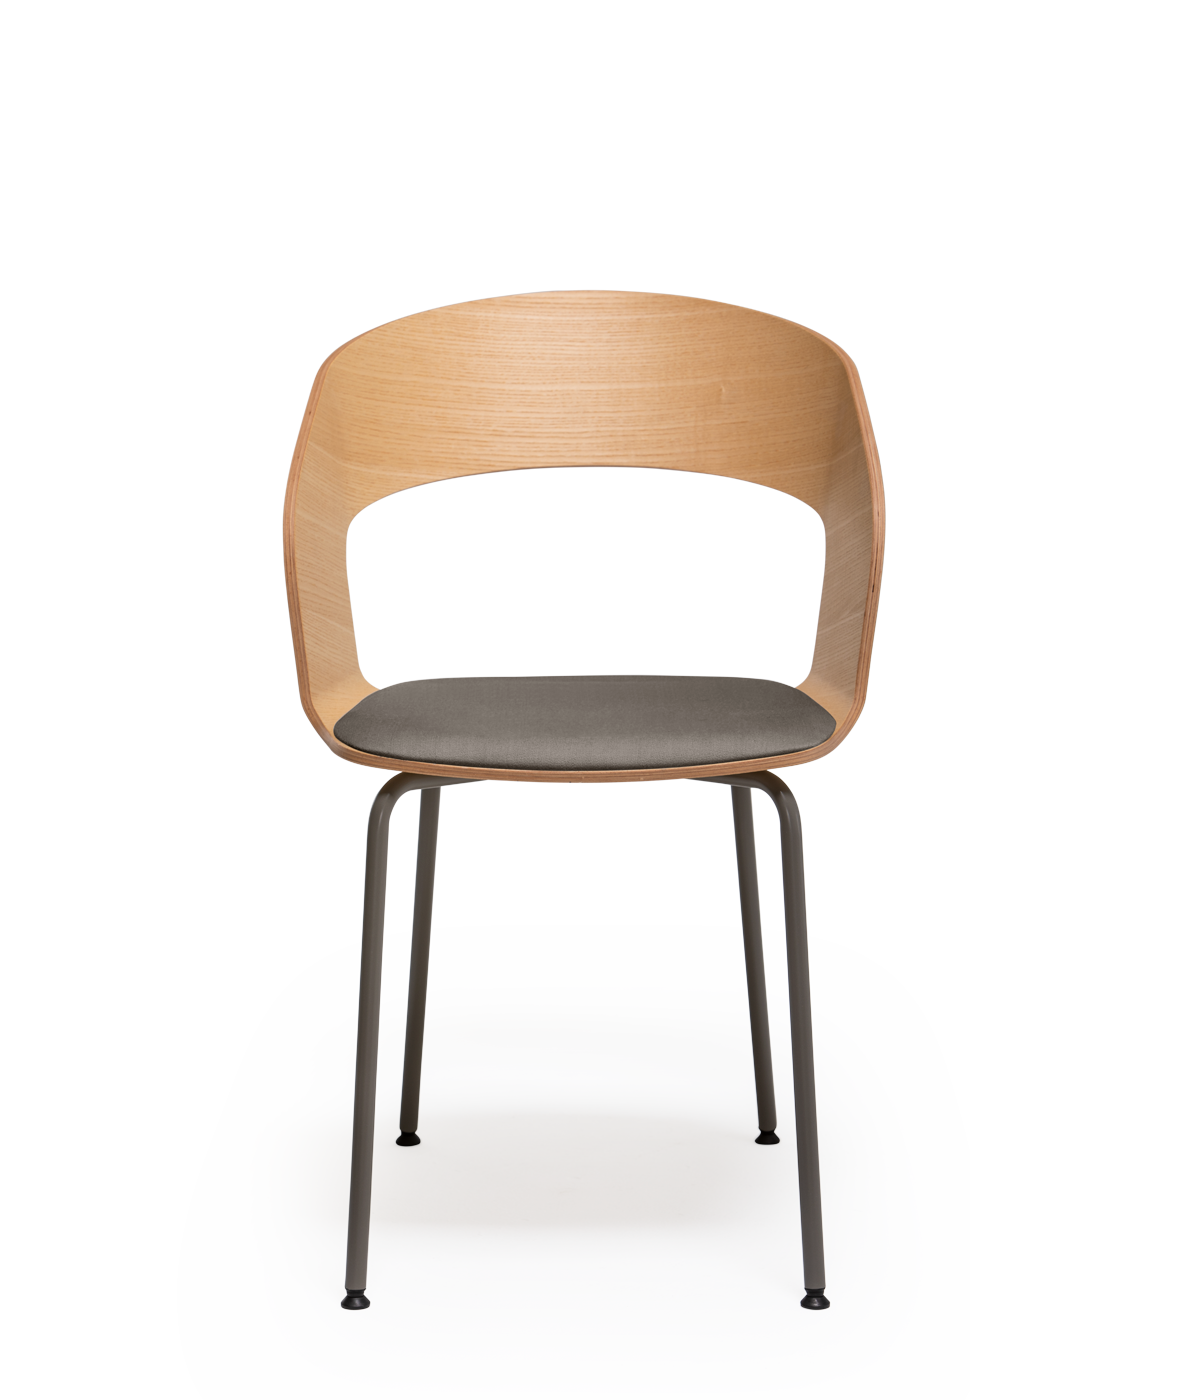 Vergés - Goose chair Model B with metallic armrests and legs